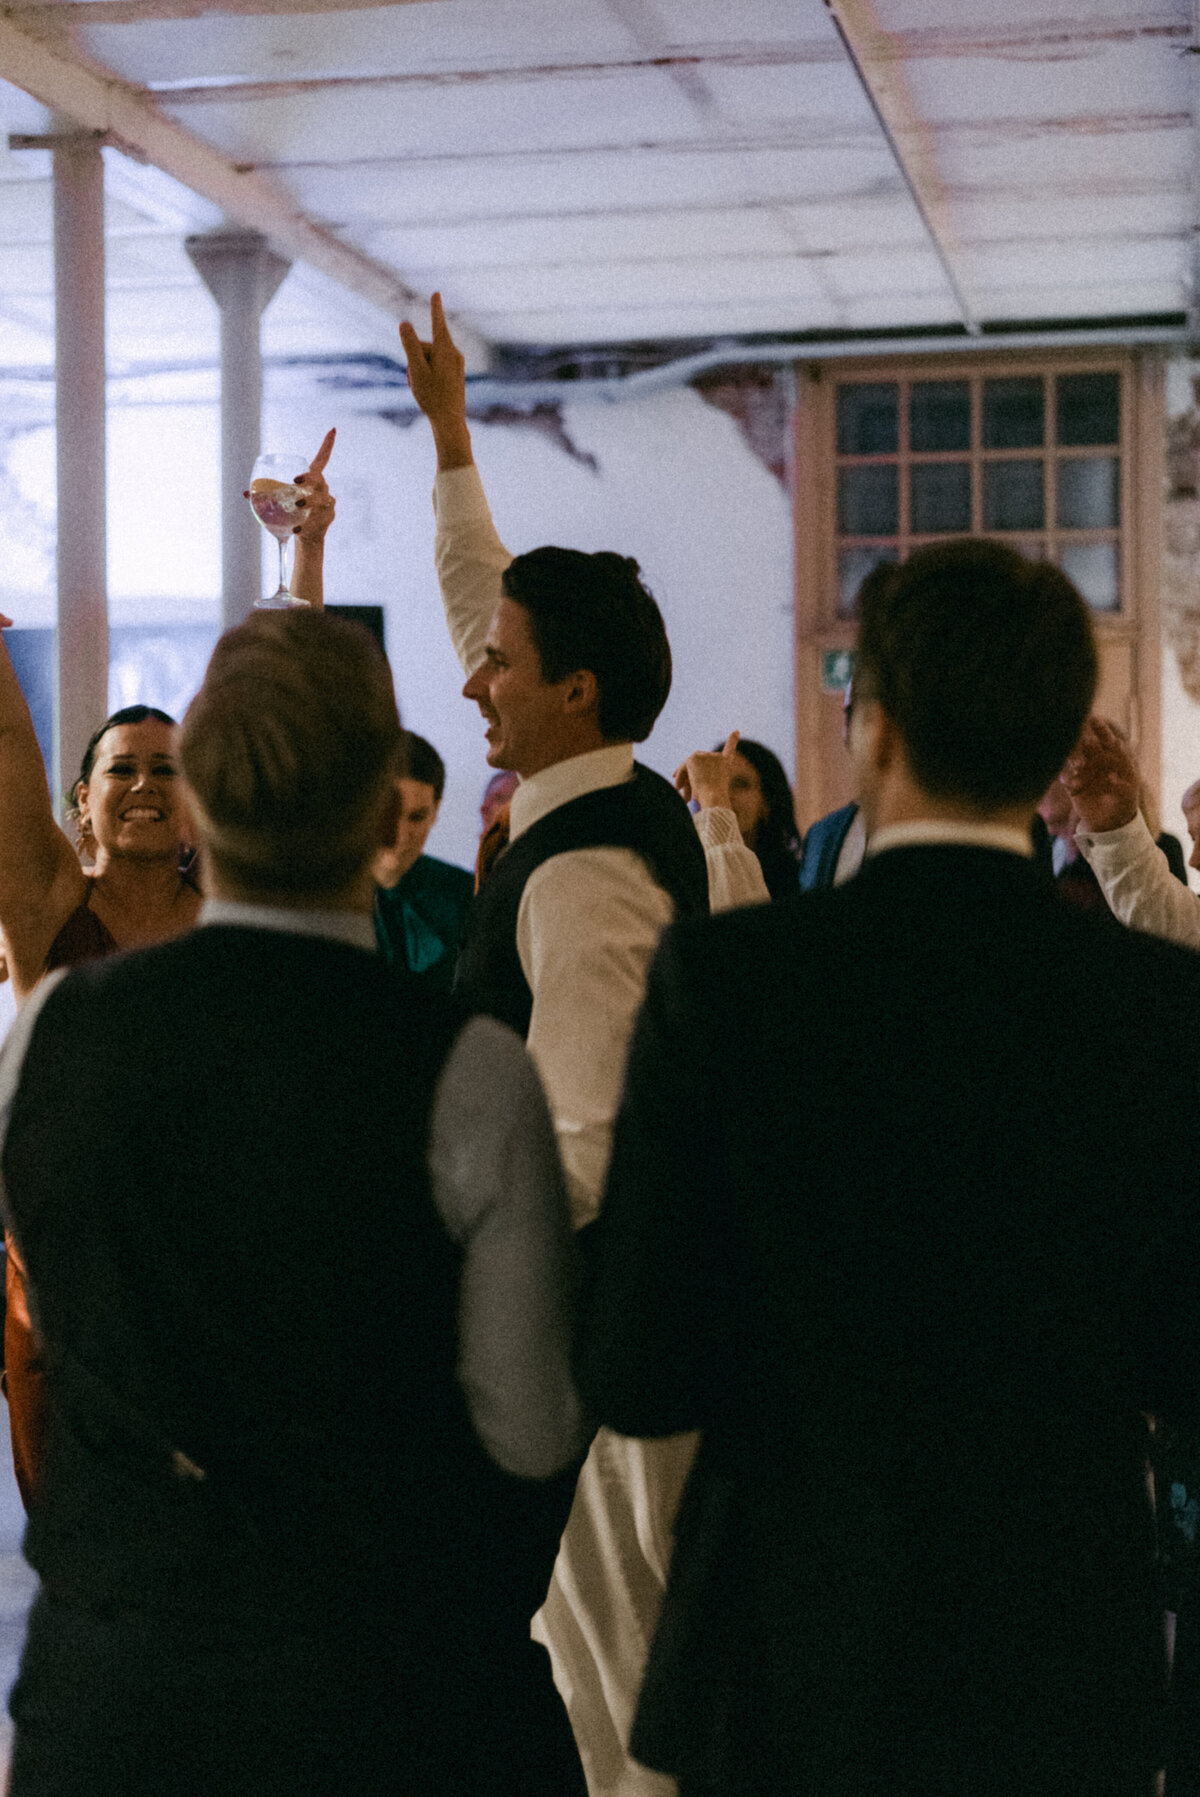 A documentary wedding  photo of  the dancing in Oitbacka gård captured by wedding photographer Hannika Gabrielsson in Finland